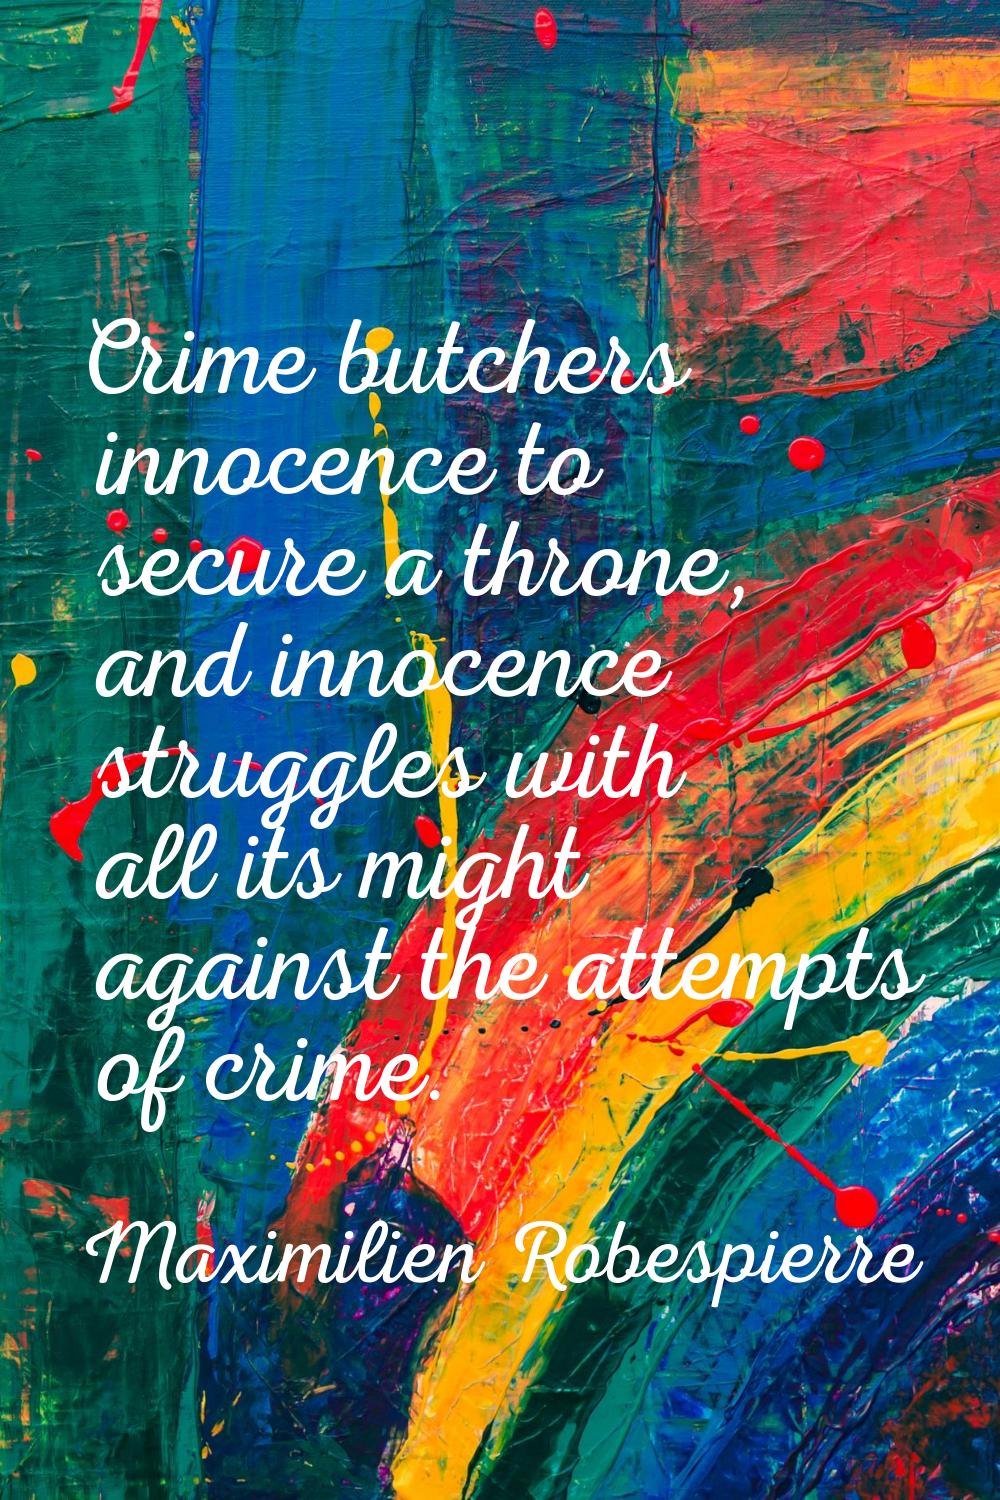 Crime butchers innocence to secure a throne, and innocence struggles with all its might against the